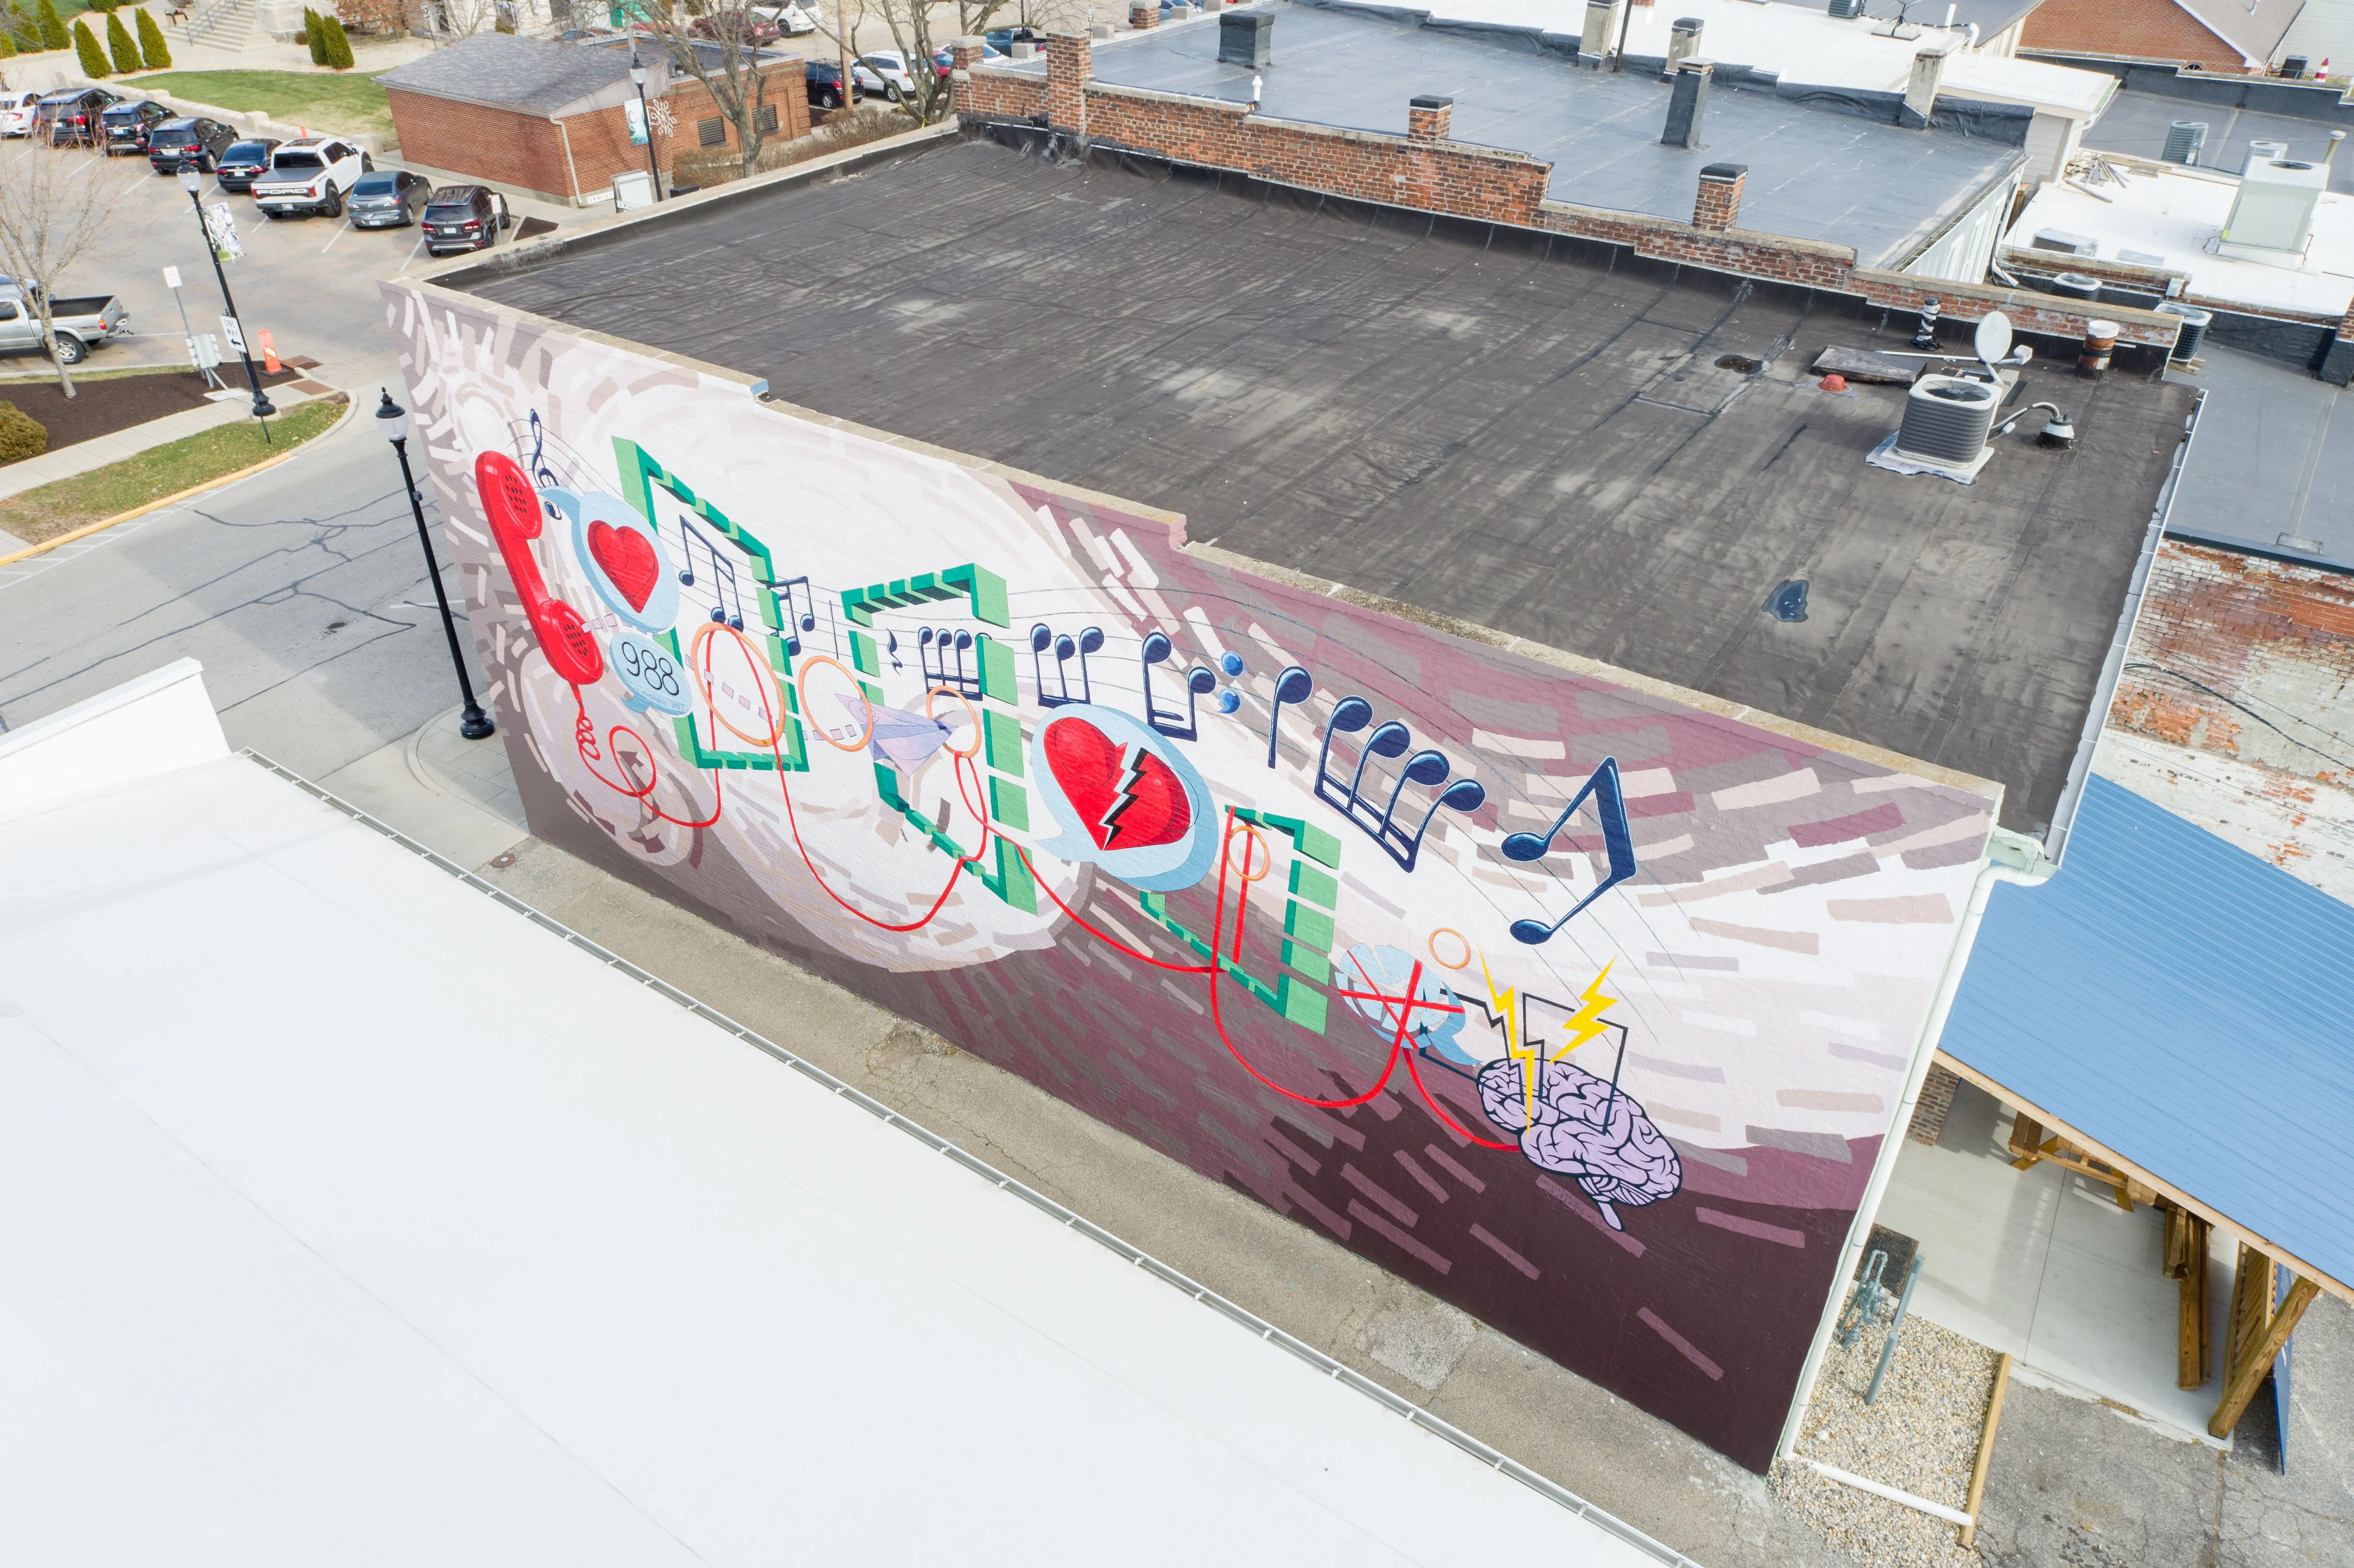 Aerial view of a building rooftop with a large, colorful graffiti mural.